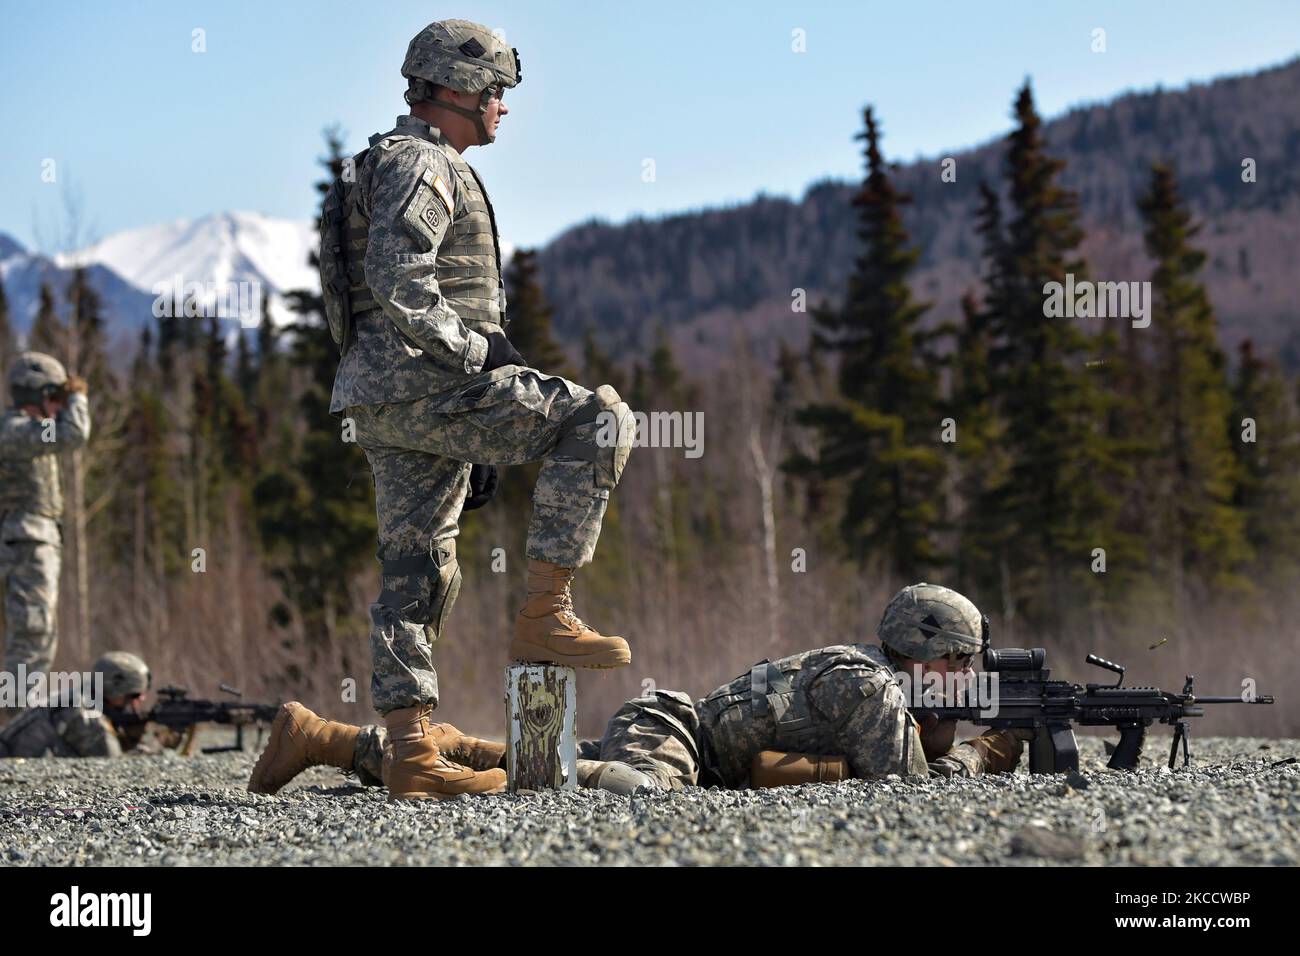 U.S. Army Soldier watches a fellow soldier fire an M249 Squad Automatic Weapon. Stock Photo